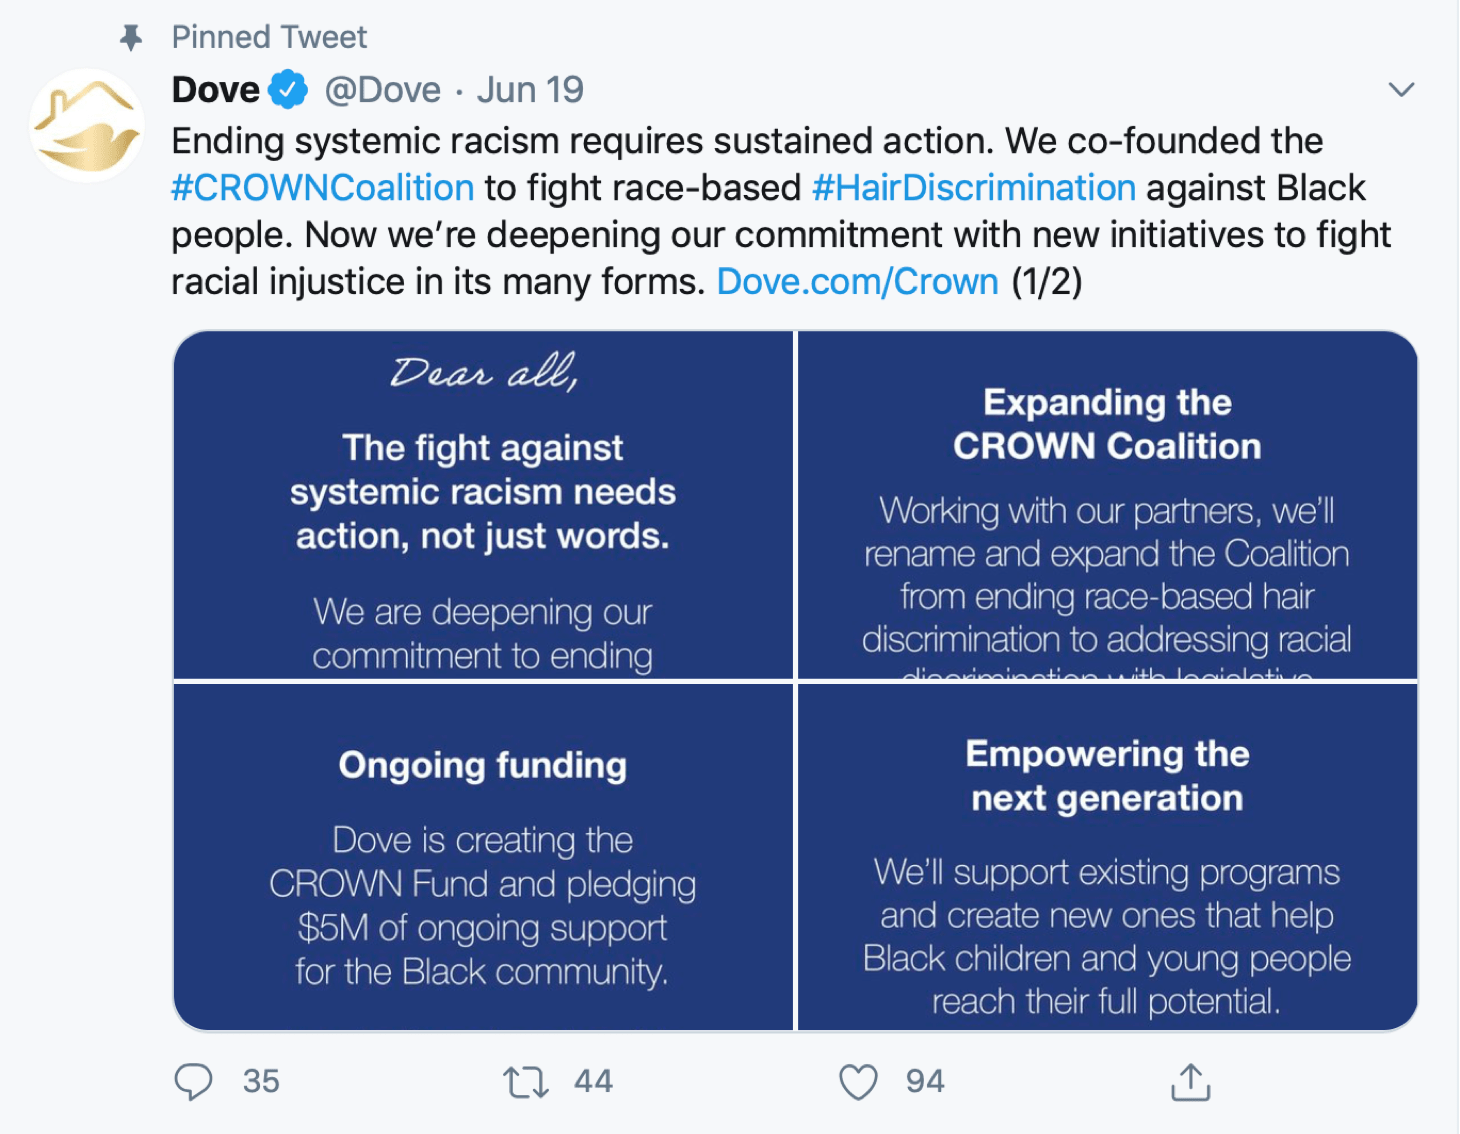 Tweet from Dove about ending systematic racism